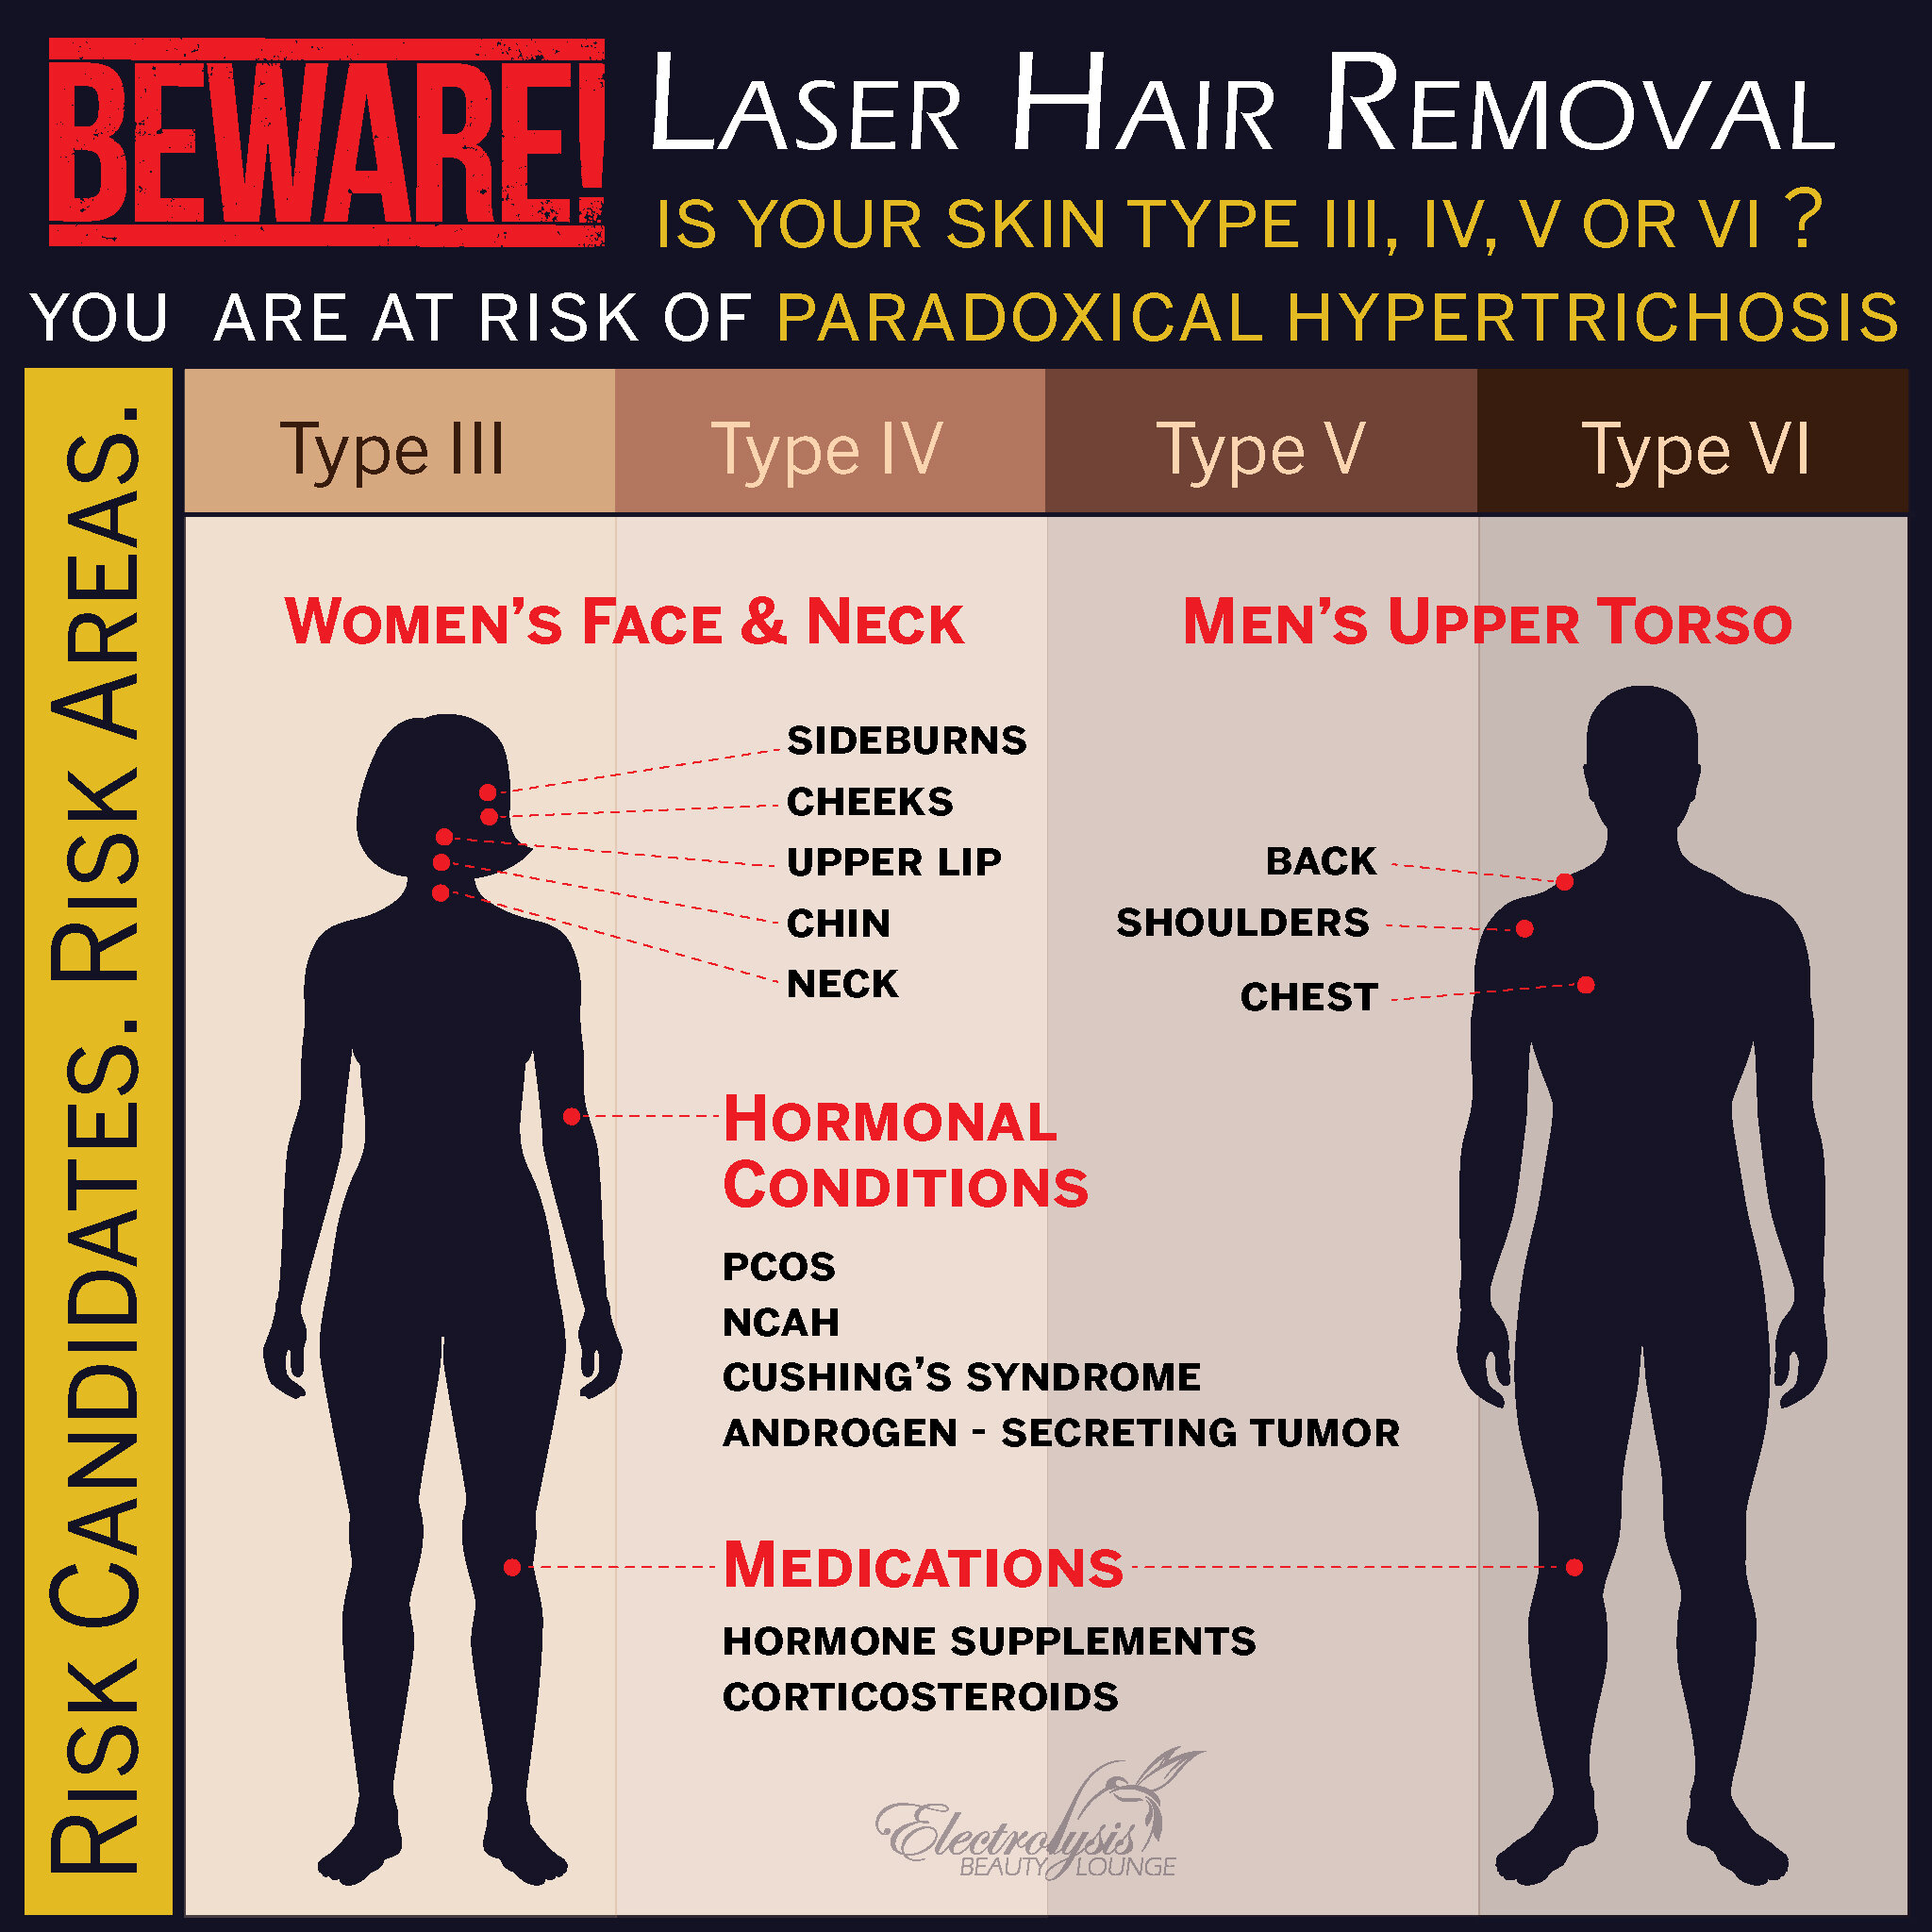 About Laser Hair Removal  Beware of Laser Hair Removal